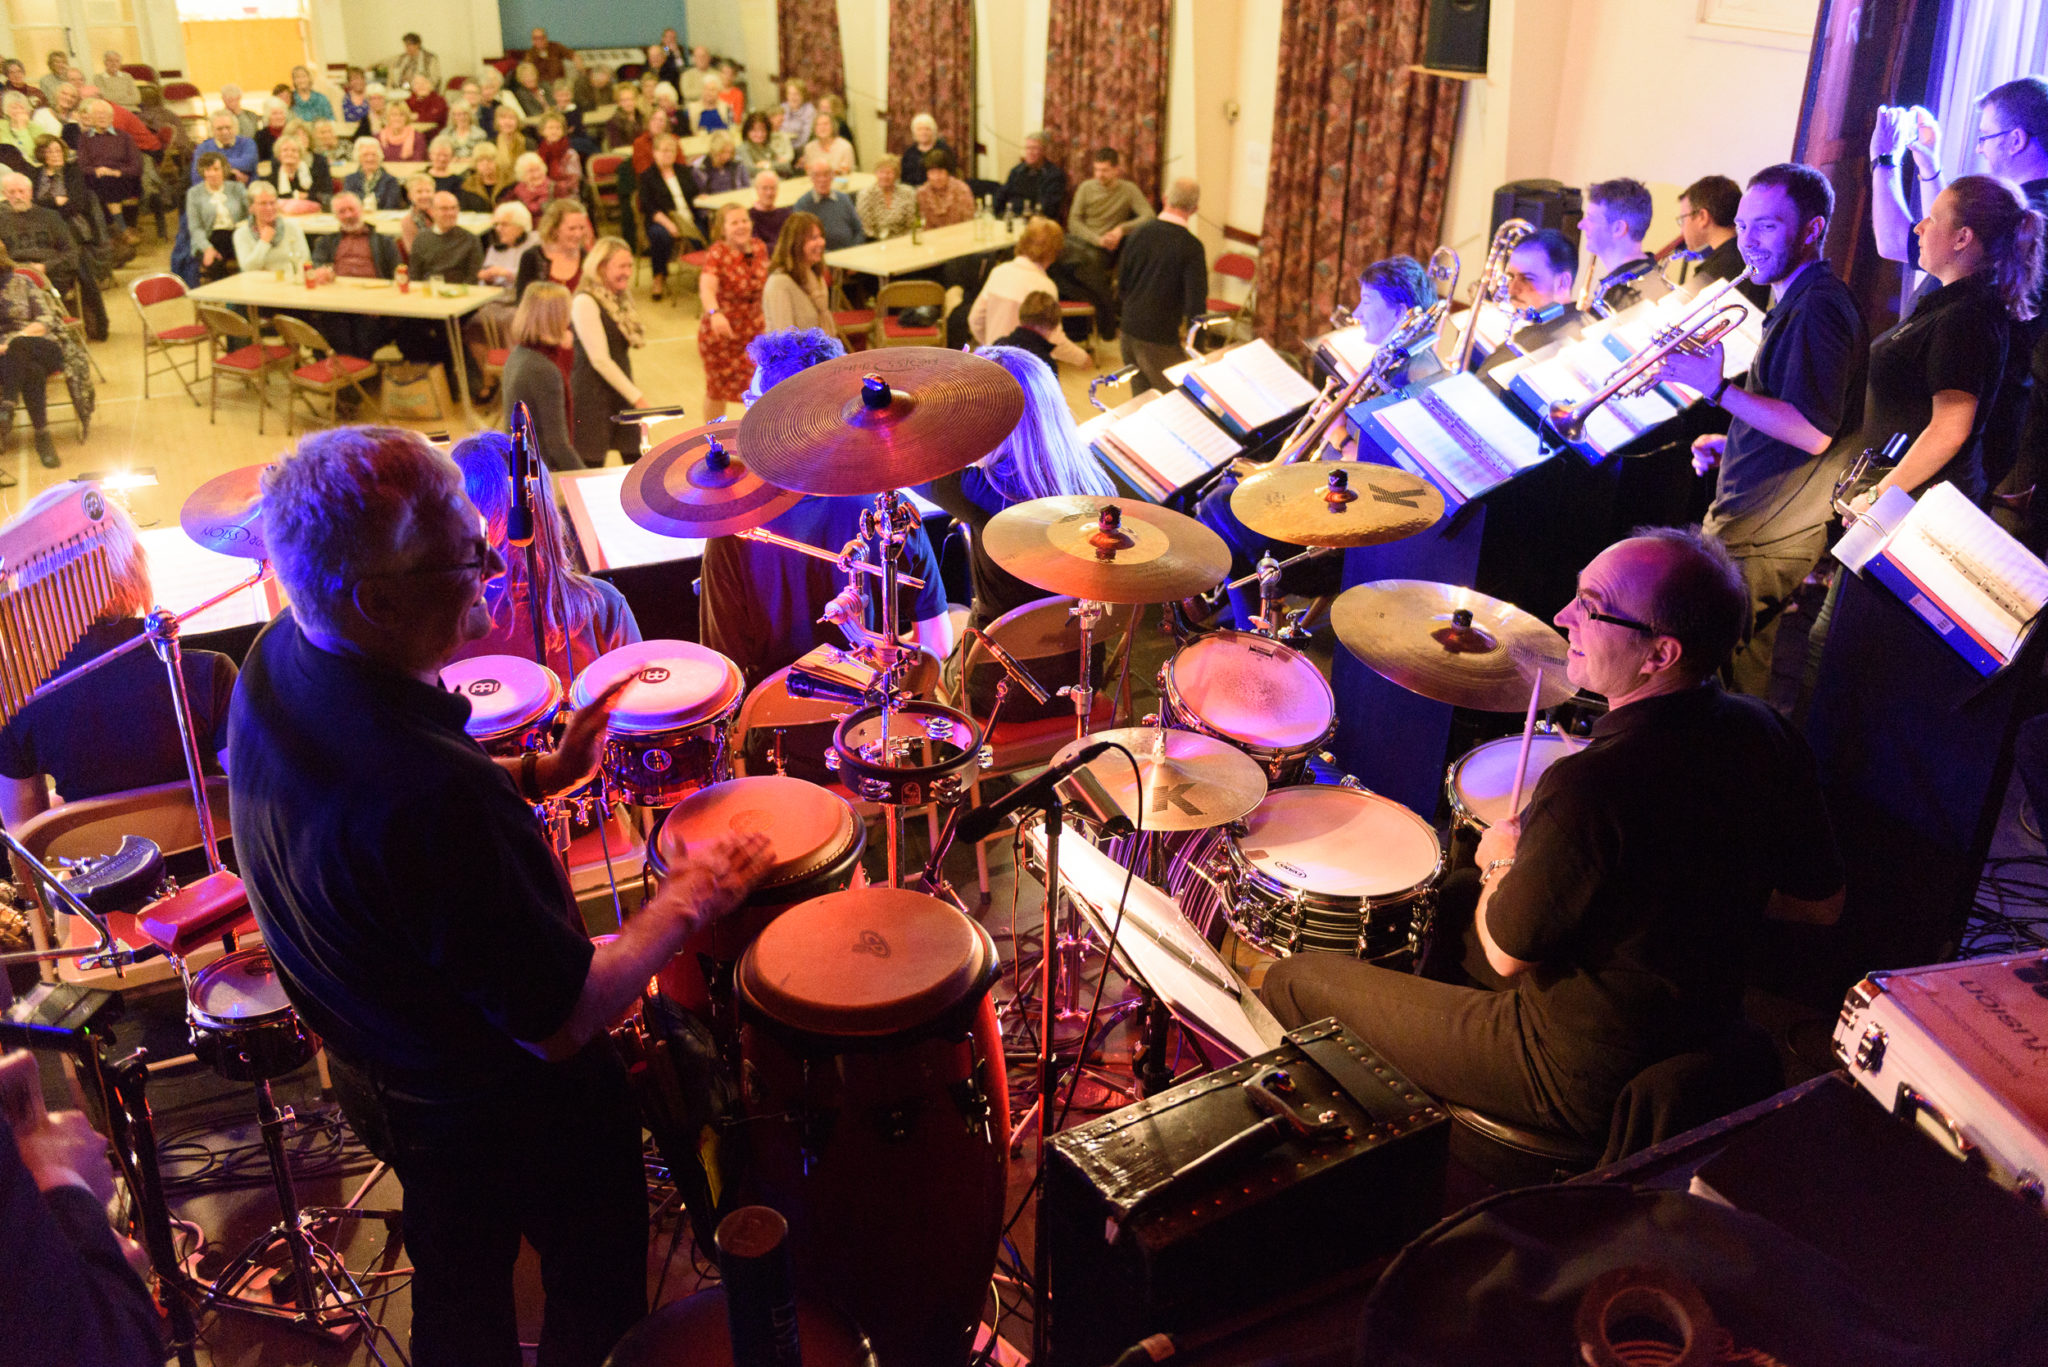 Park Lane Big Band - Weddings, Corporate Events, Parties, Functions